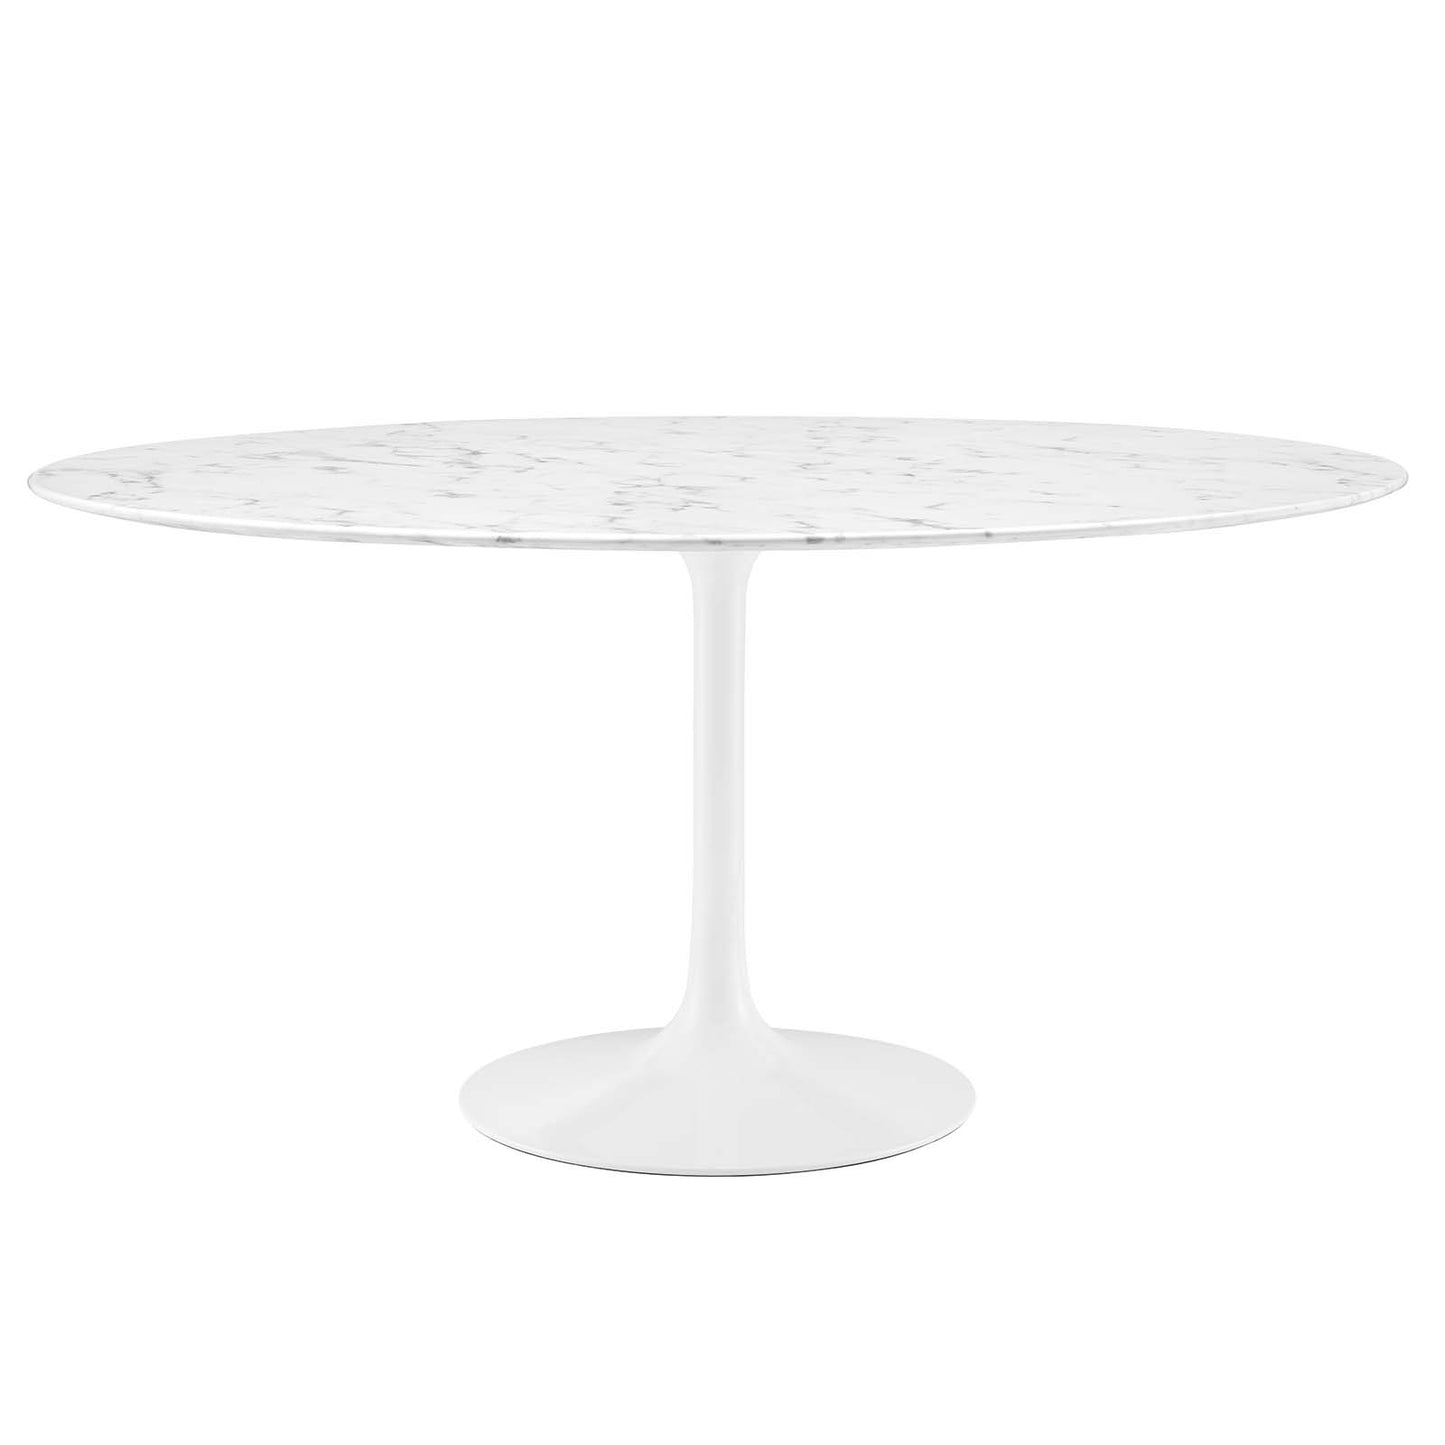 Modway Lippa 60" Round Artificial Marble Dining Table - EEI-1133